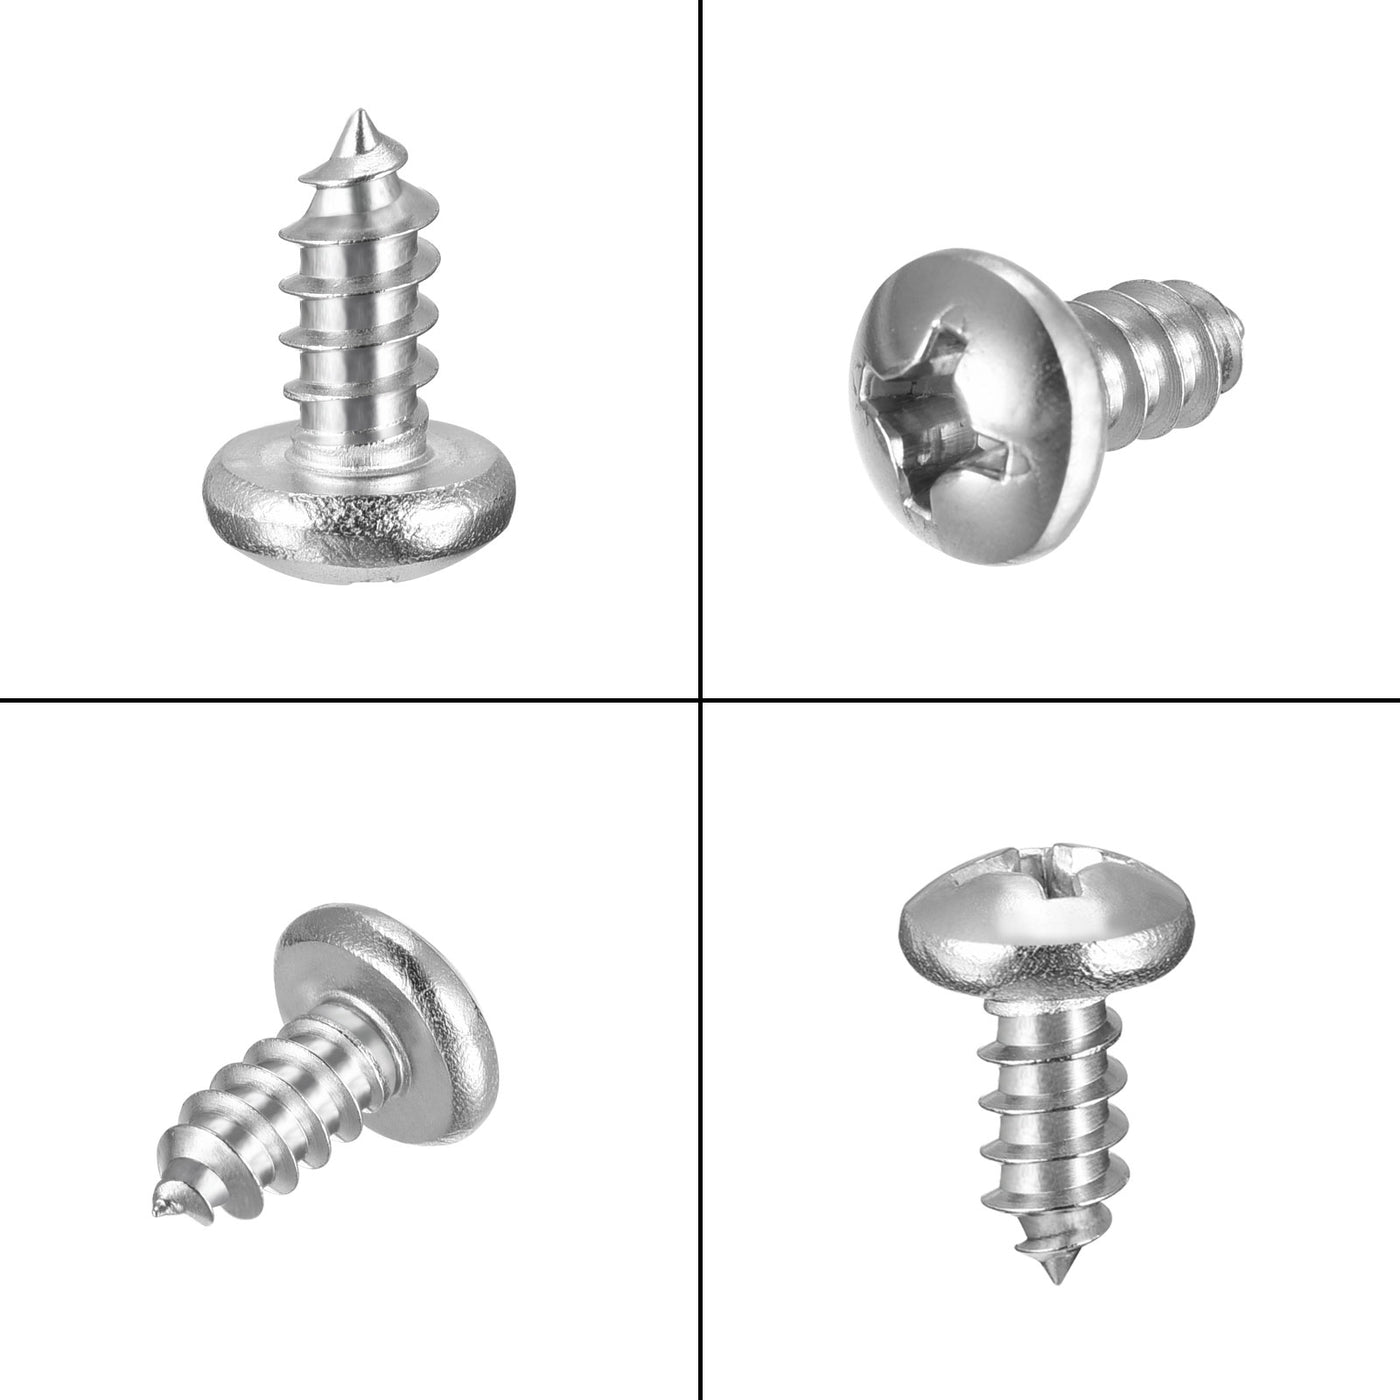 uxcell Uxcell Screws #4x1/4" Phillips Self Tapping Screw 304 Stainless Steel 200pcs